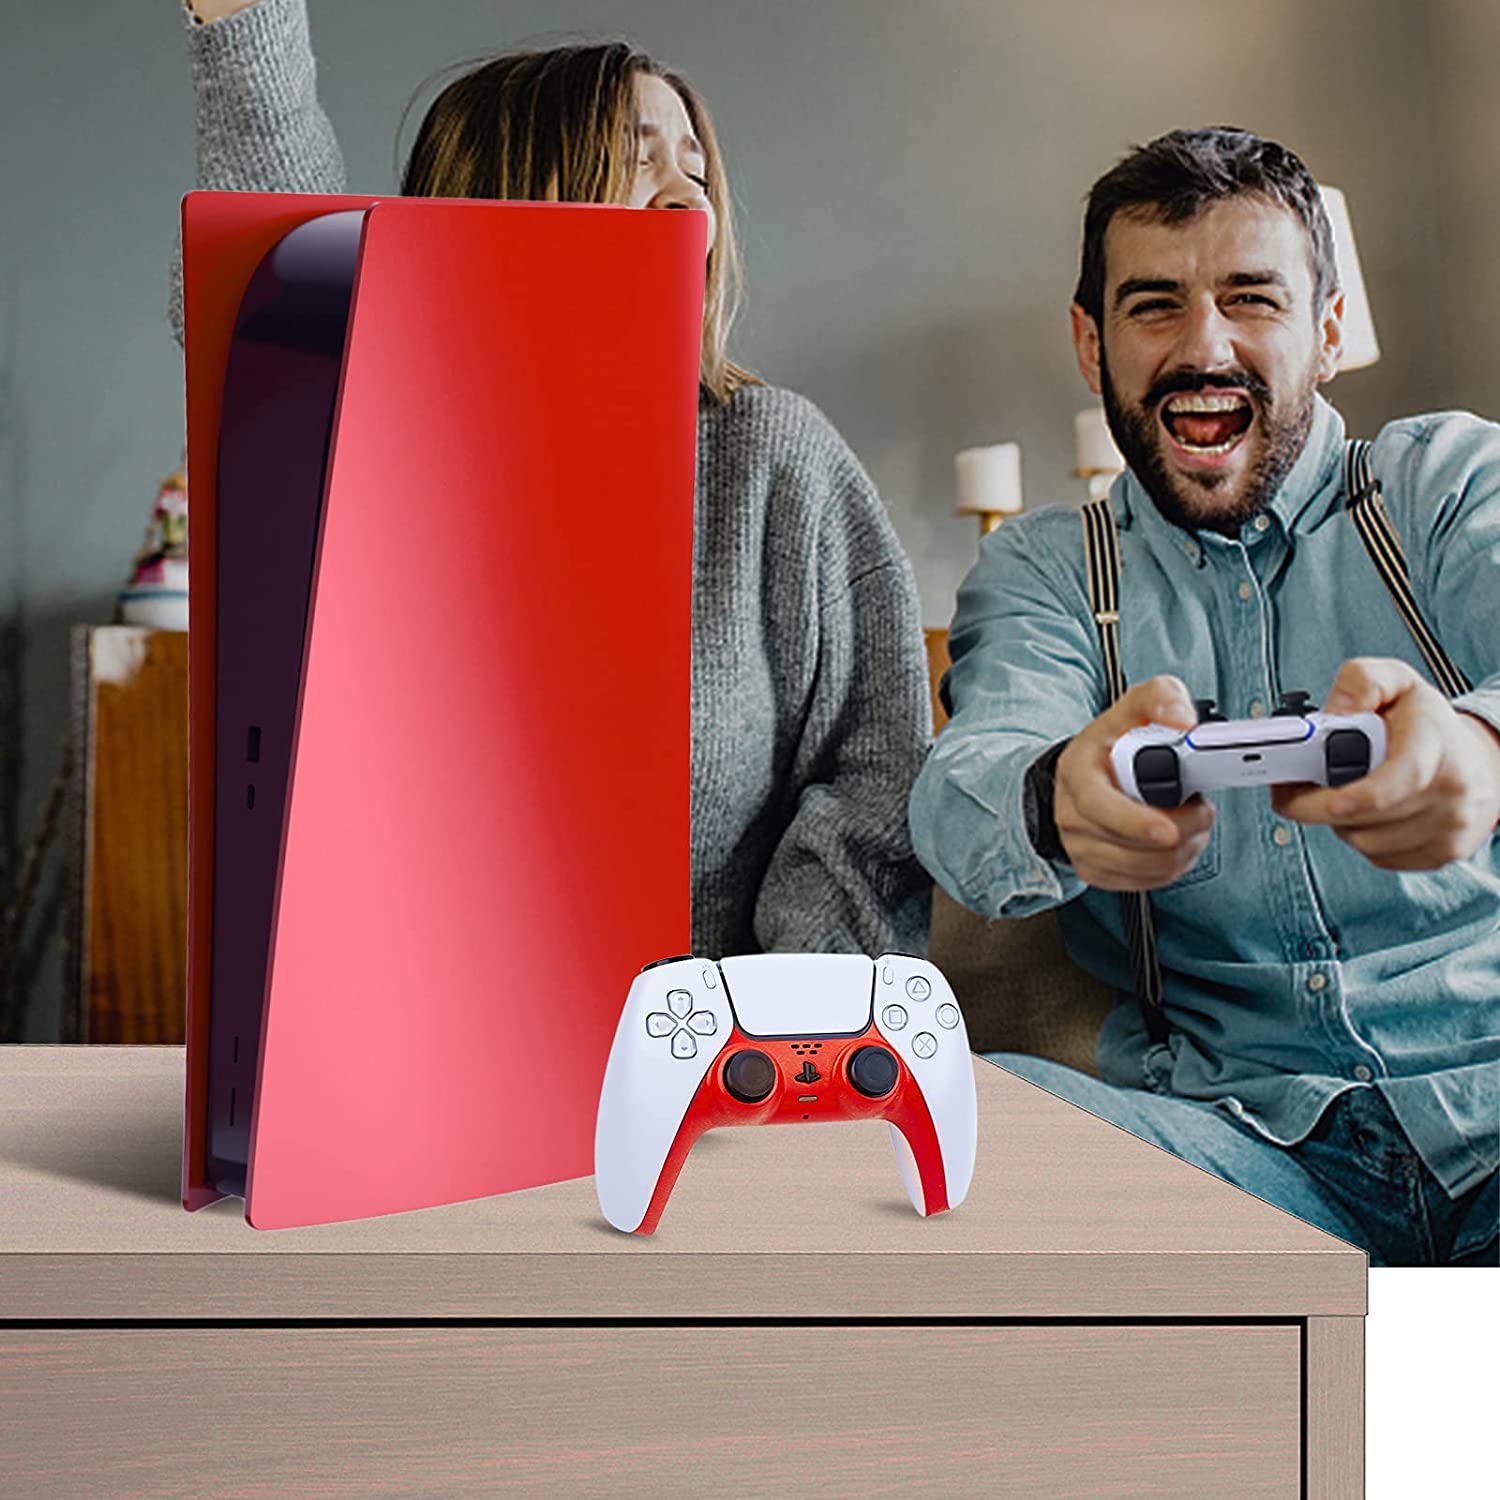 In the scene, a couple joyfully gaming with our stylish panel kit, wearing smiles of happiness